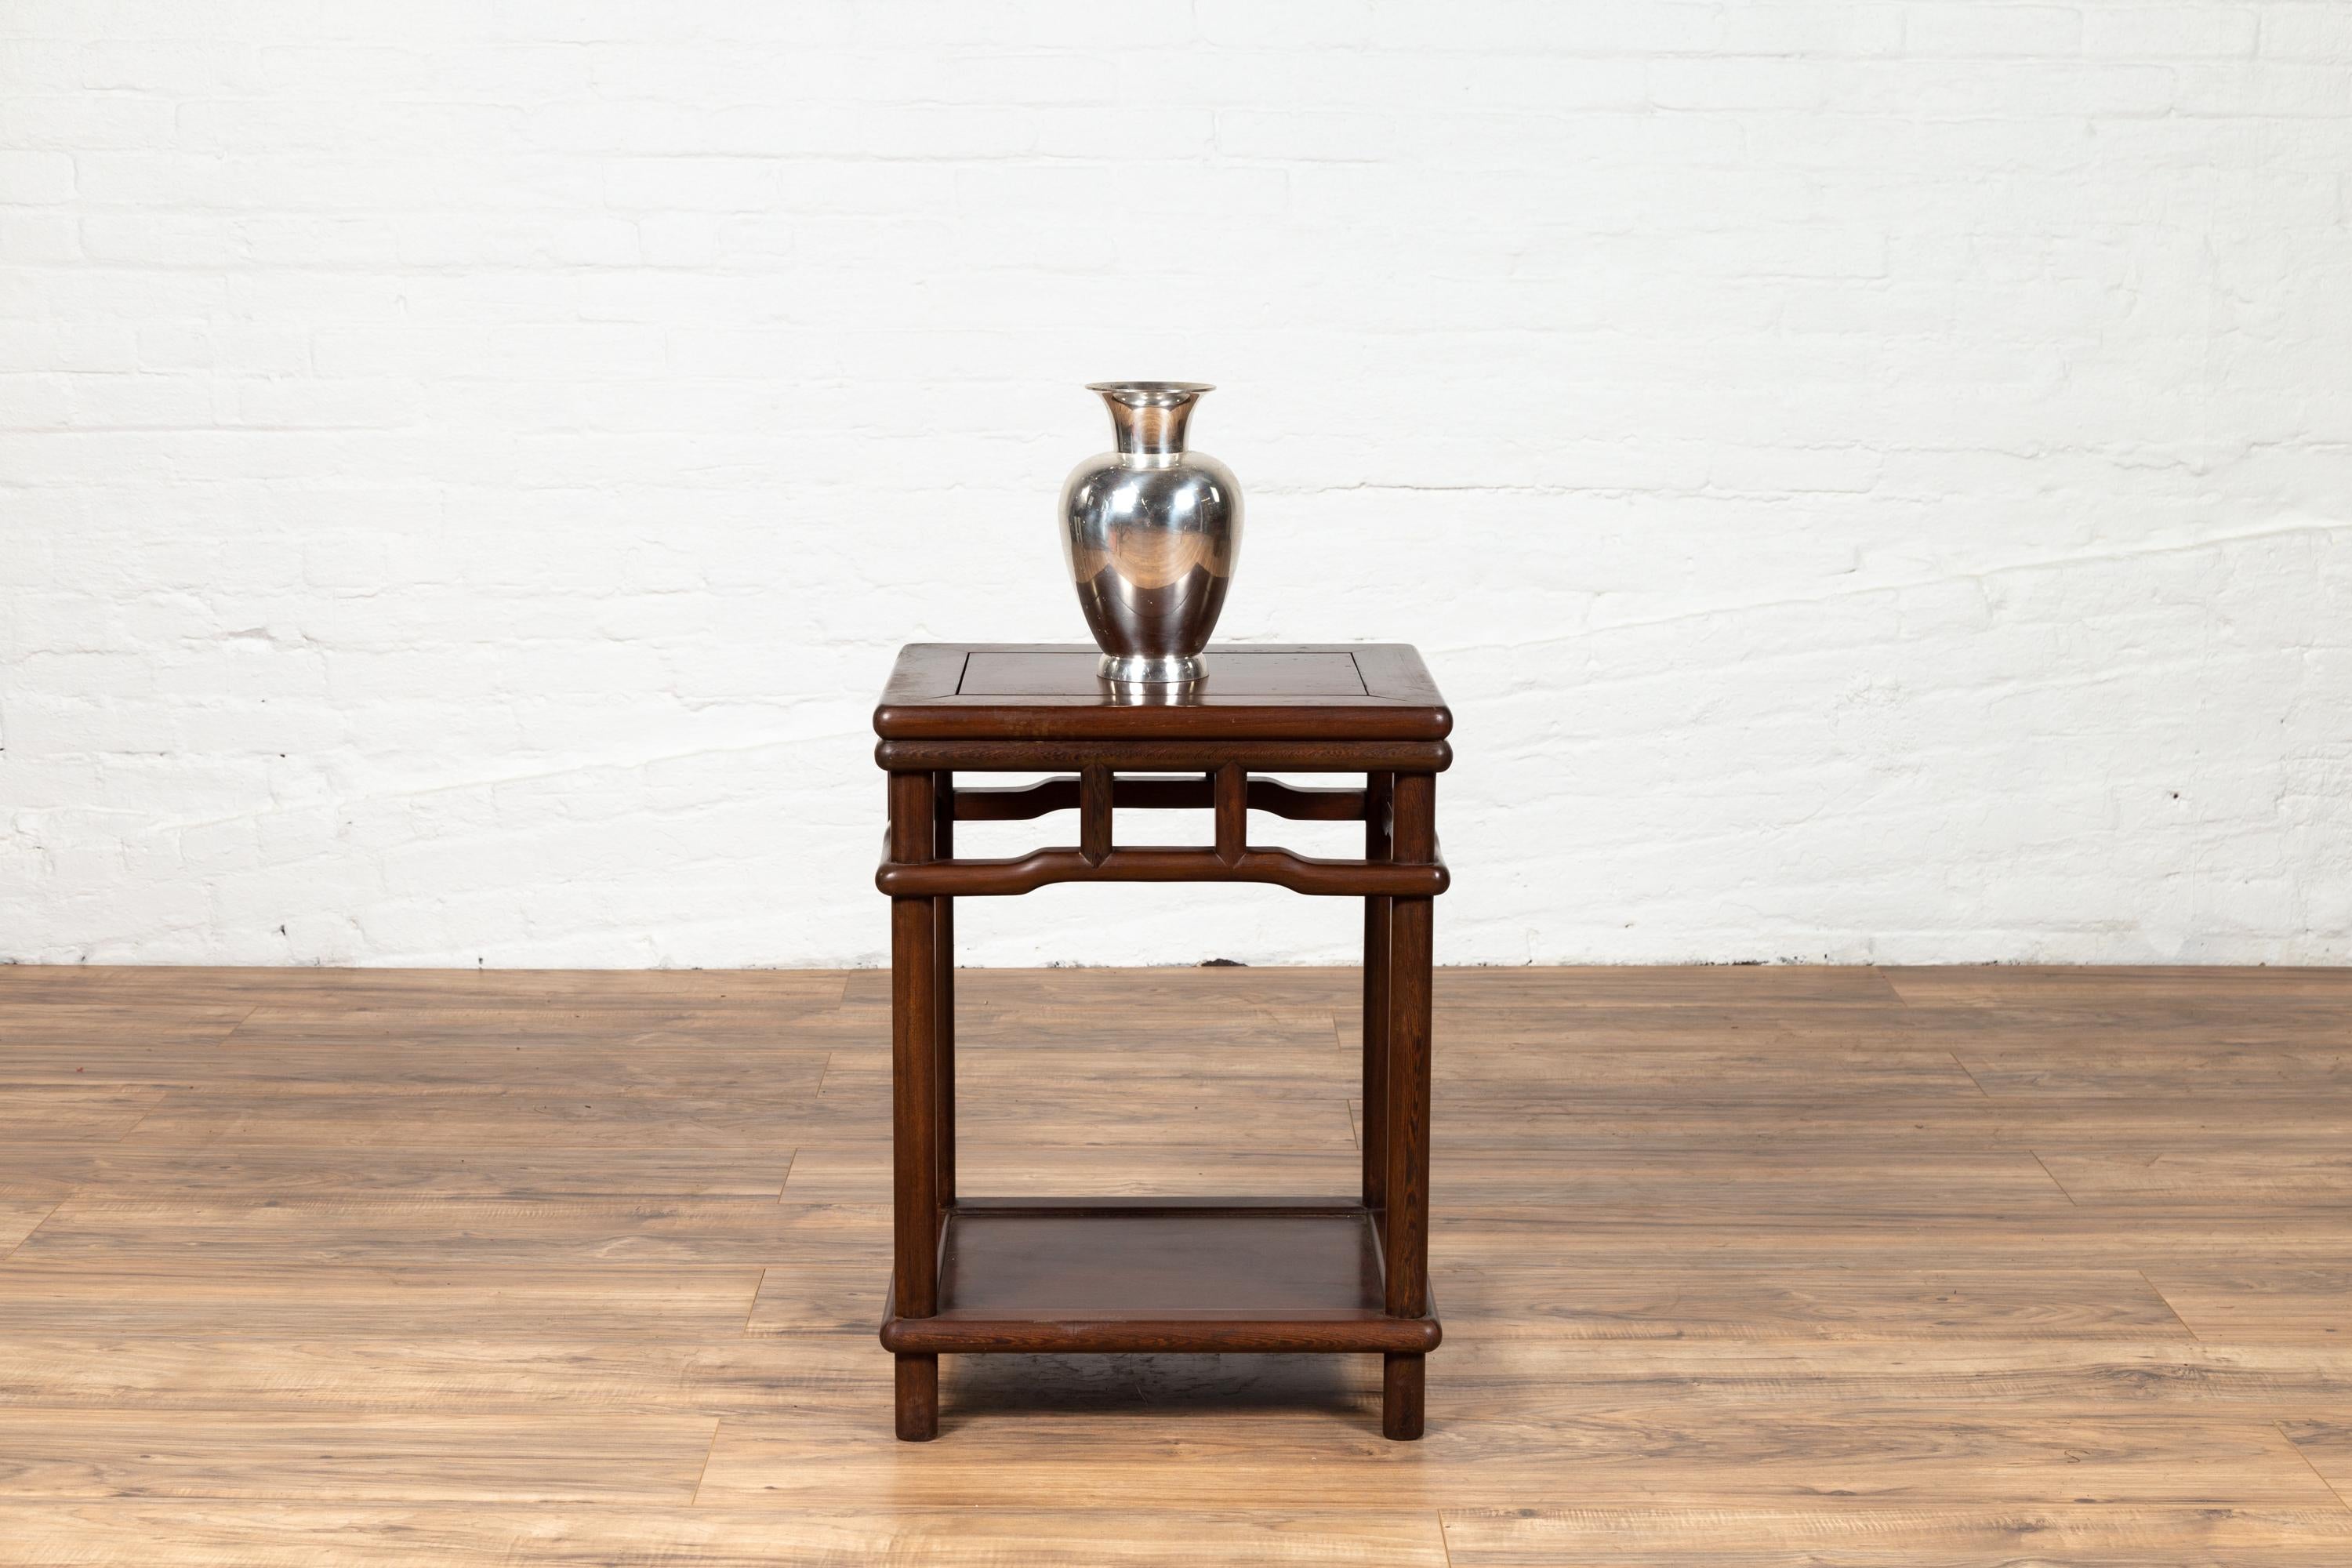 An antique Chinese Ming dynasty style accent side table from the early 20th century with dark wood patina, lower shelf and humpbacked apron. This elegant Chinese side table features a rectangular top with central board, sitting above a humpbacked